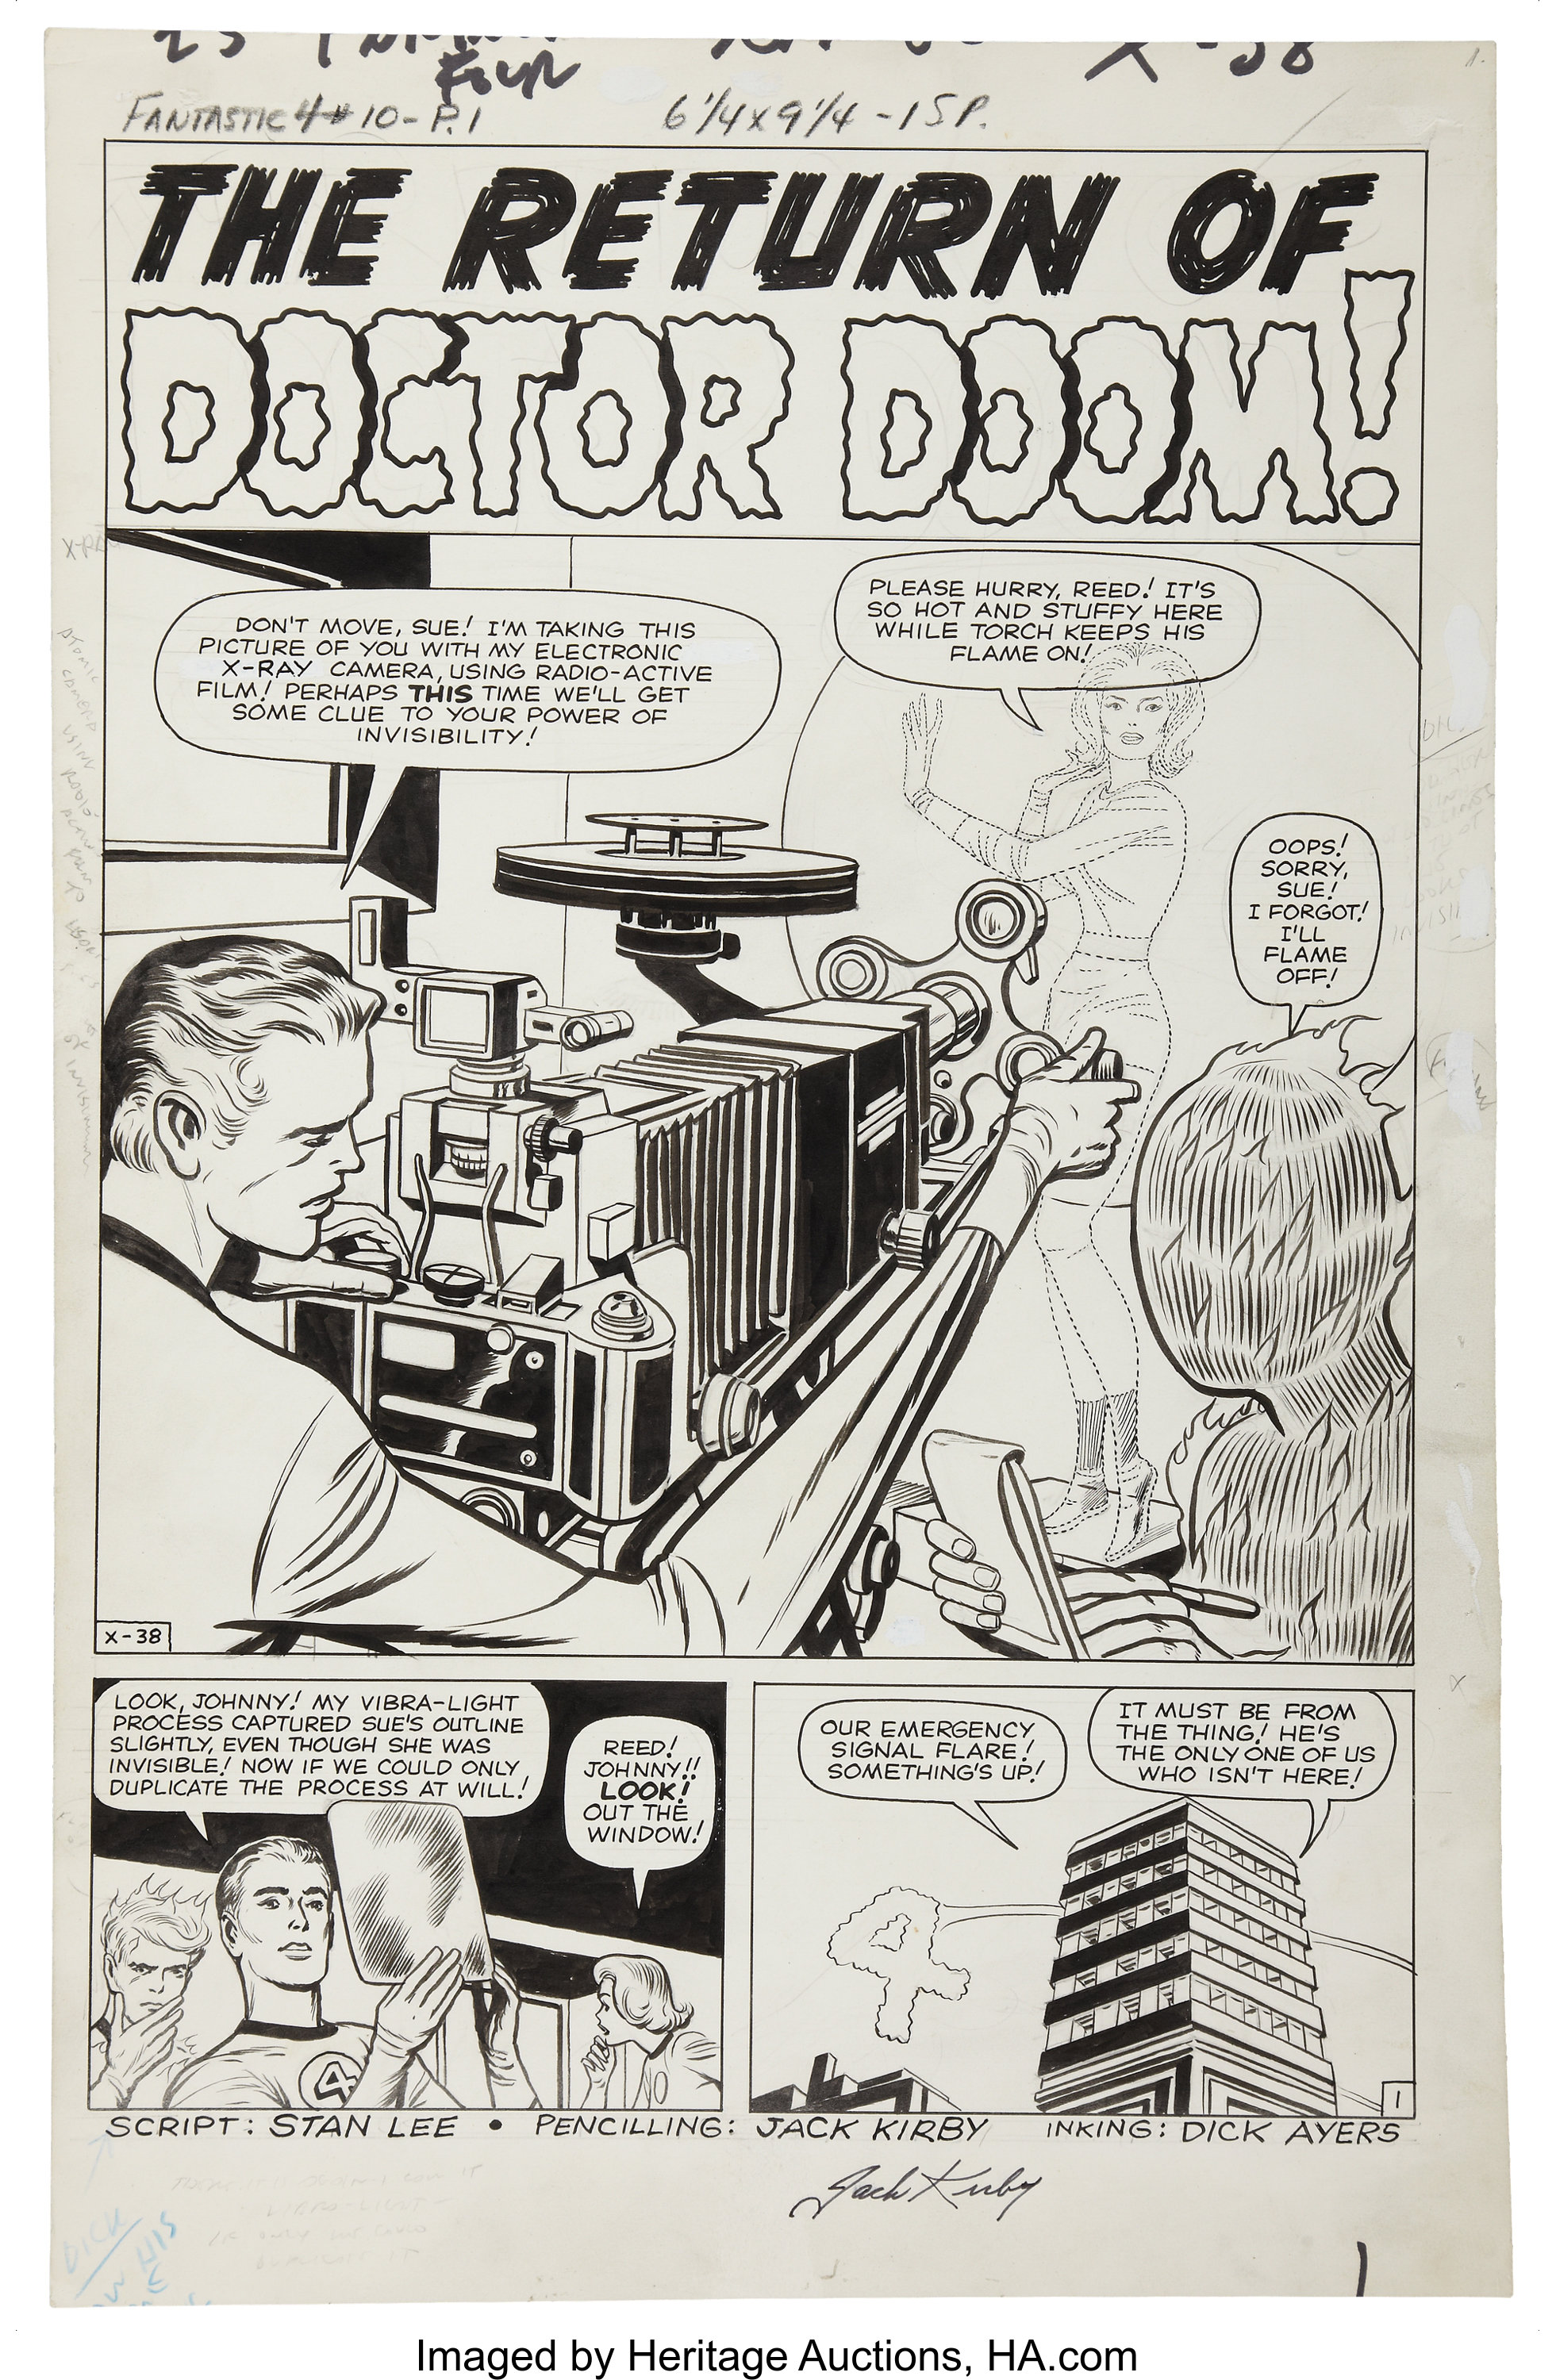 Jack Kirby and Dick Ayers Fantastic Four #10 Title Page 1 "The